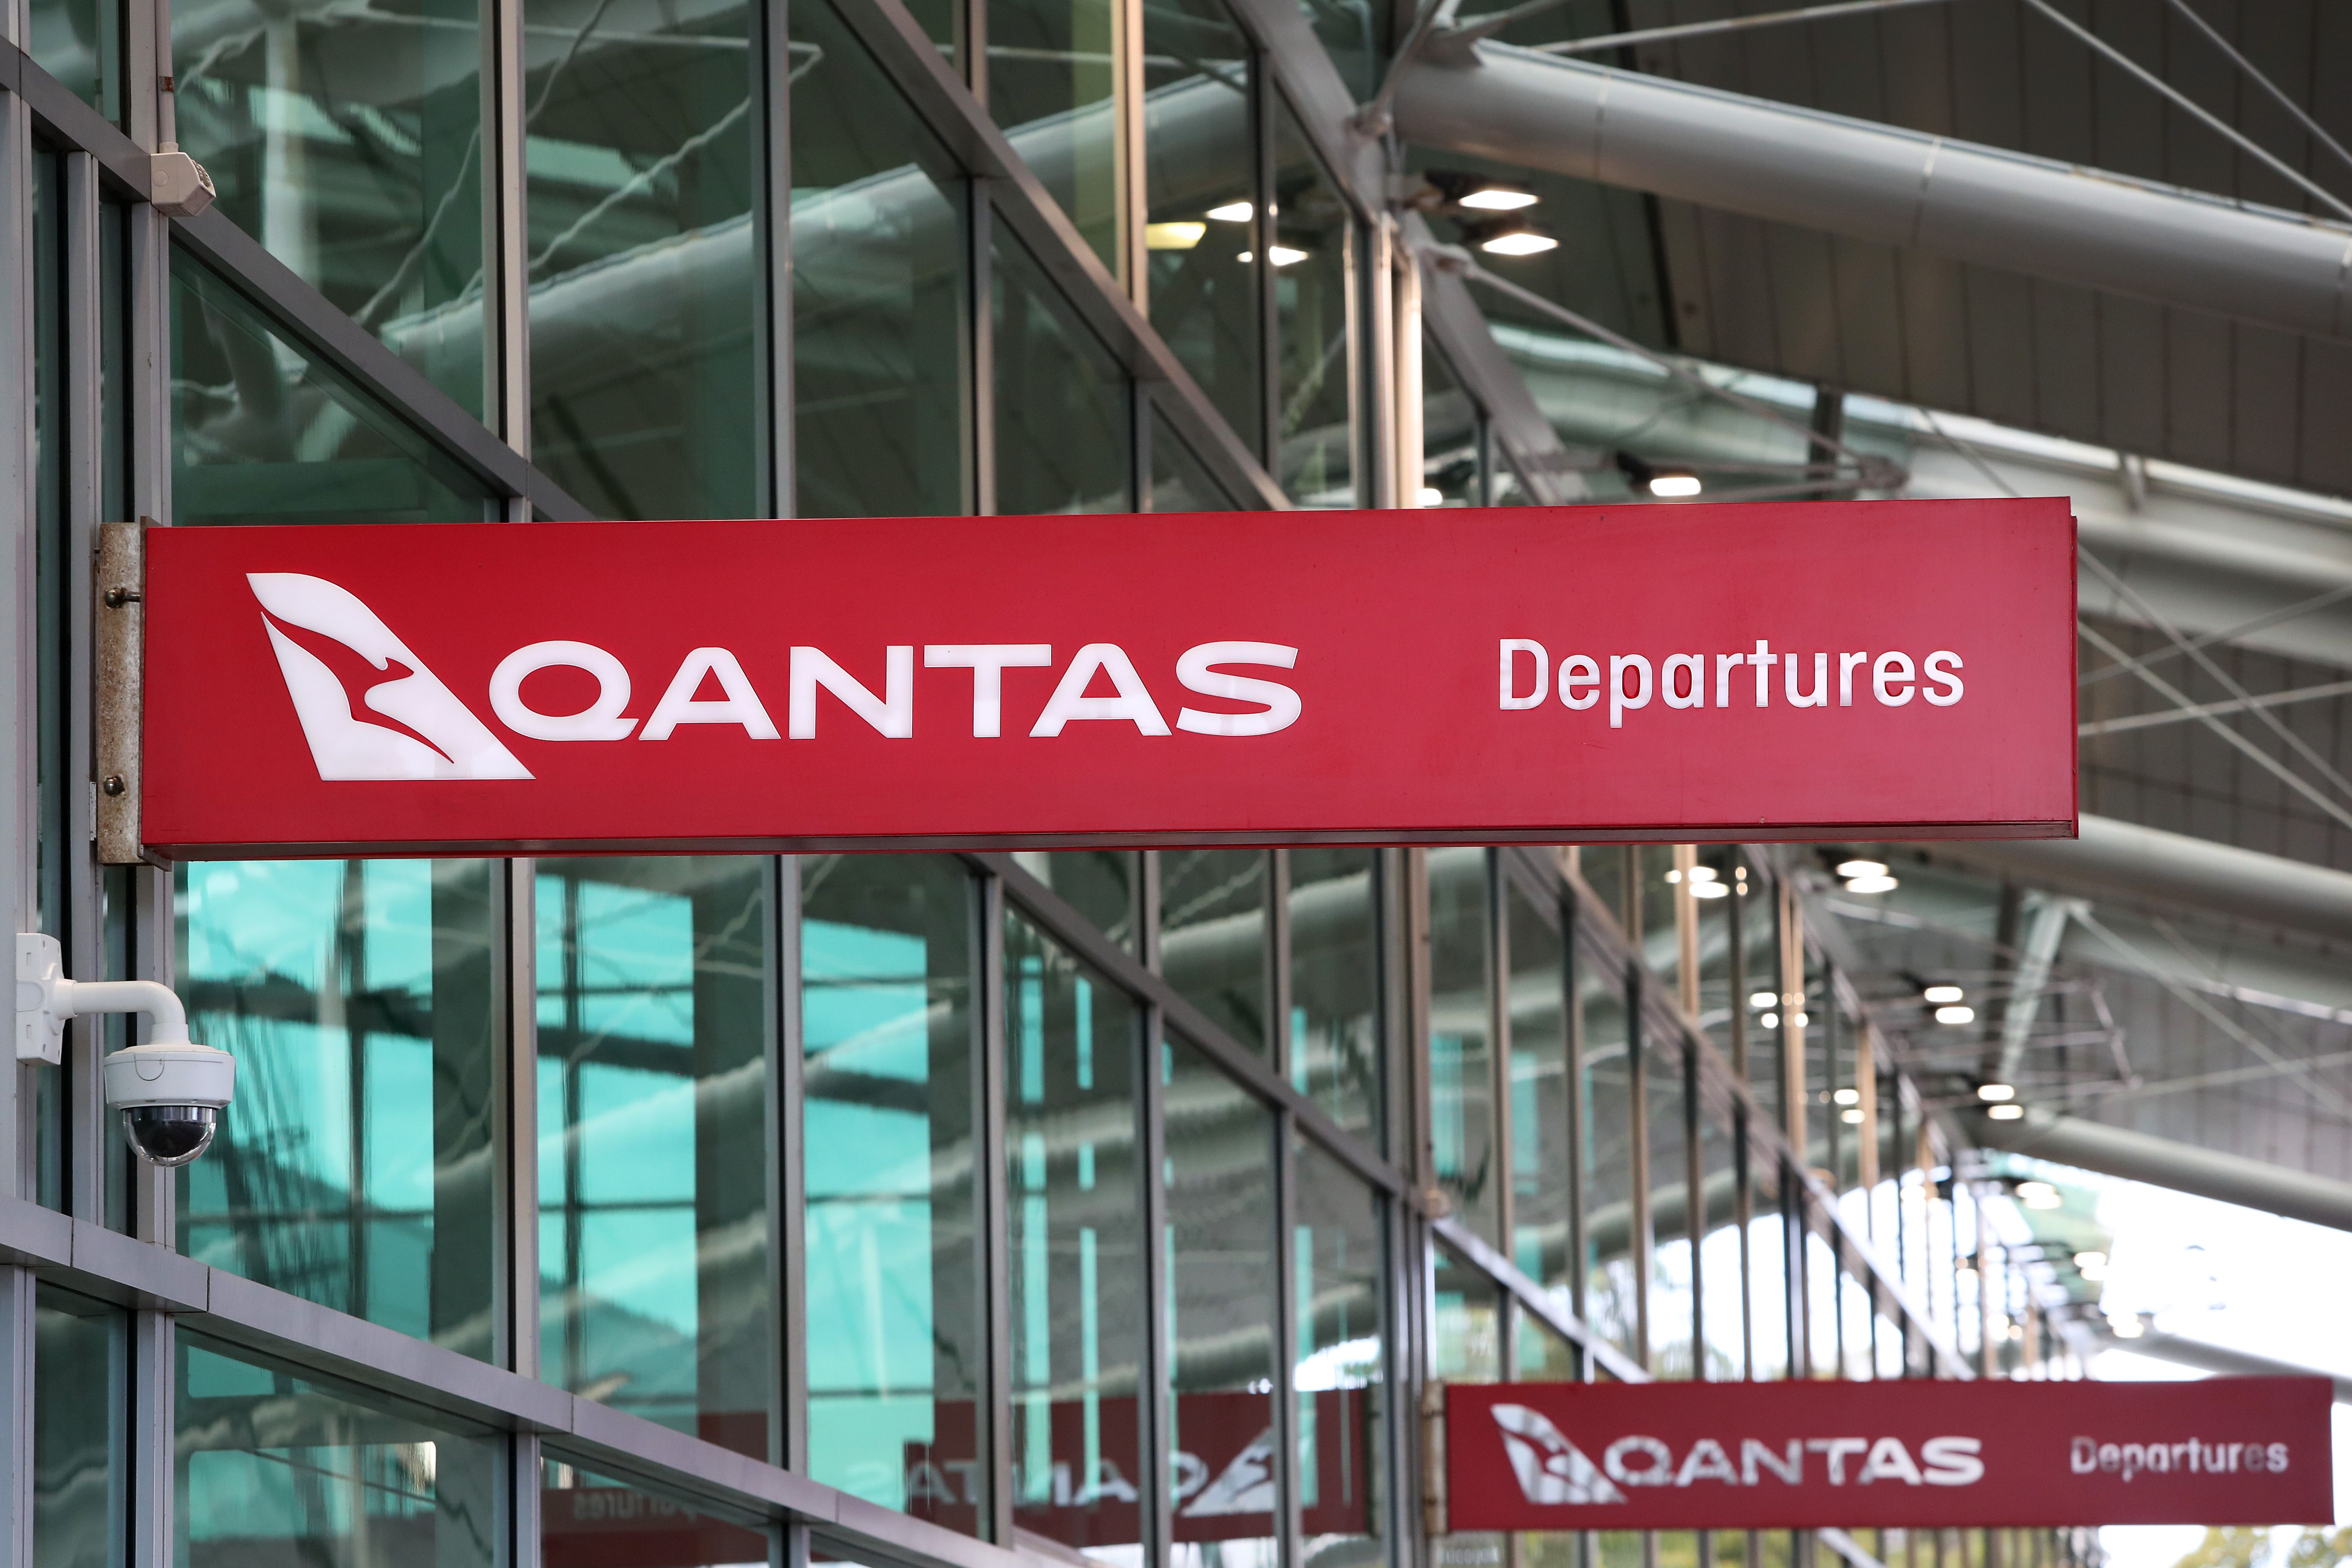 Signage is seen on display at the Qantas domestic terminal at Sydney Airport